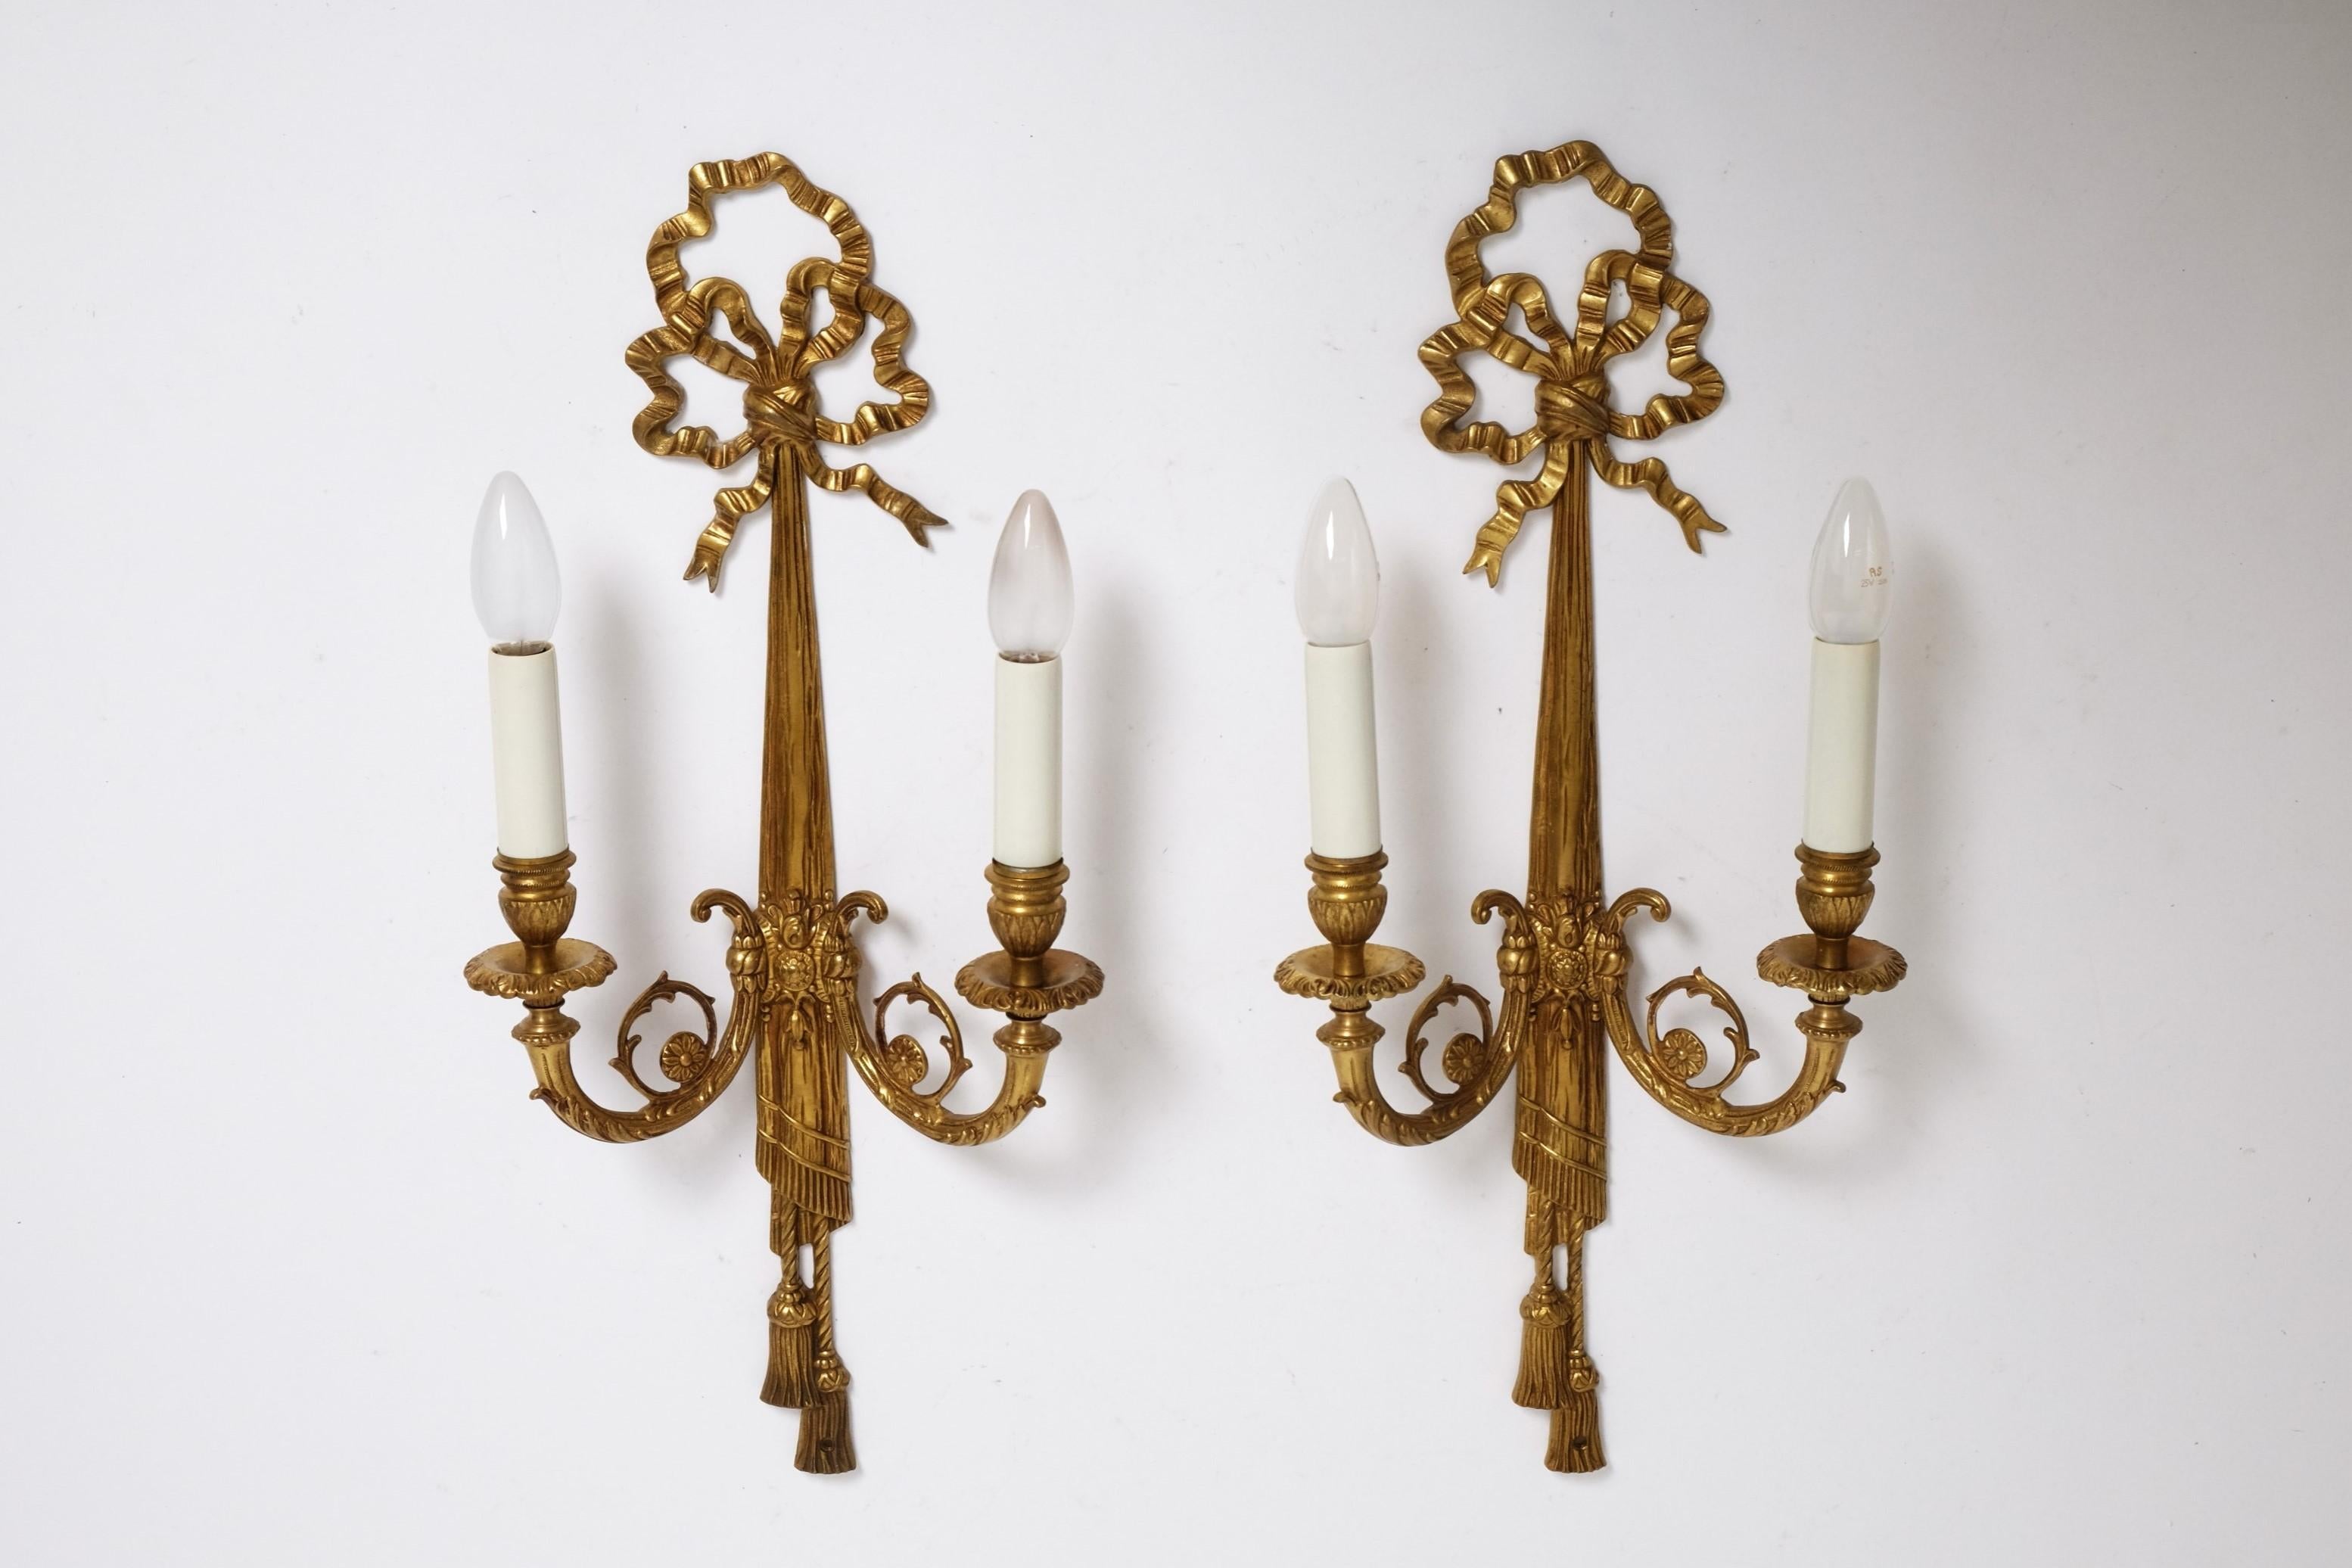 A large pair of French Louis XVI Style Sconces from the 1950s. Twin-armed ‘grand appliques’ in cast bronze with elaborately decorated arms and chased detailing. Decorated with bows, drapes and trim. Each lamp has two light arms decorated with